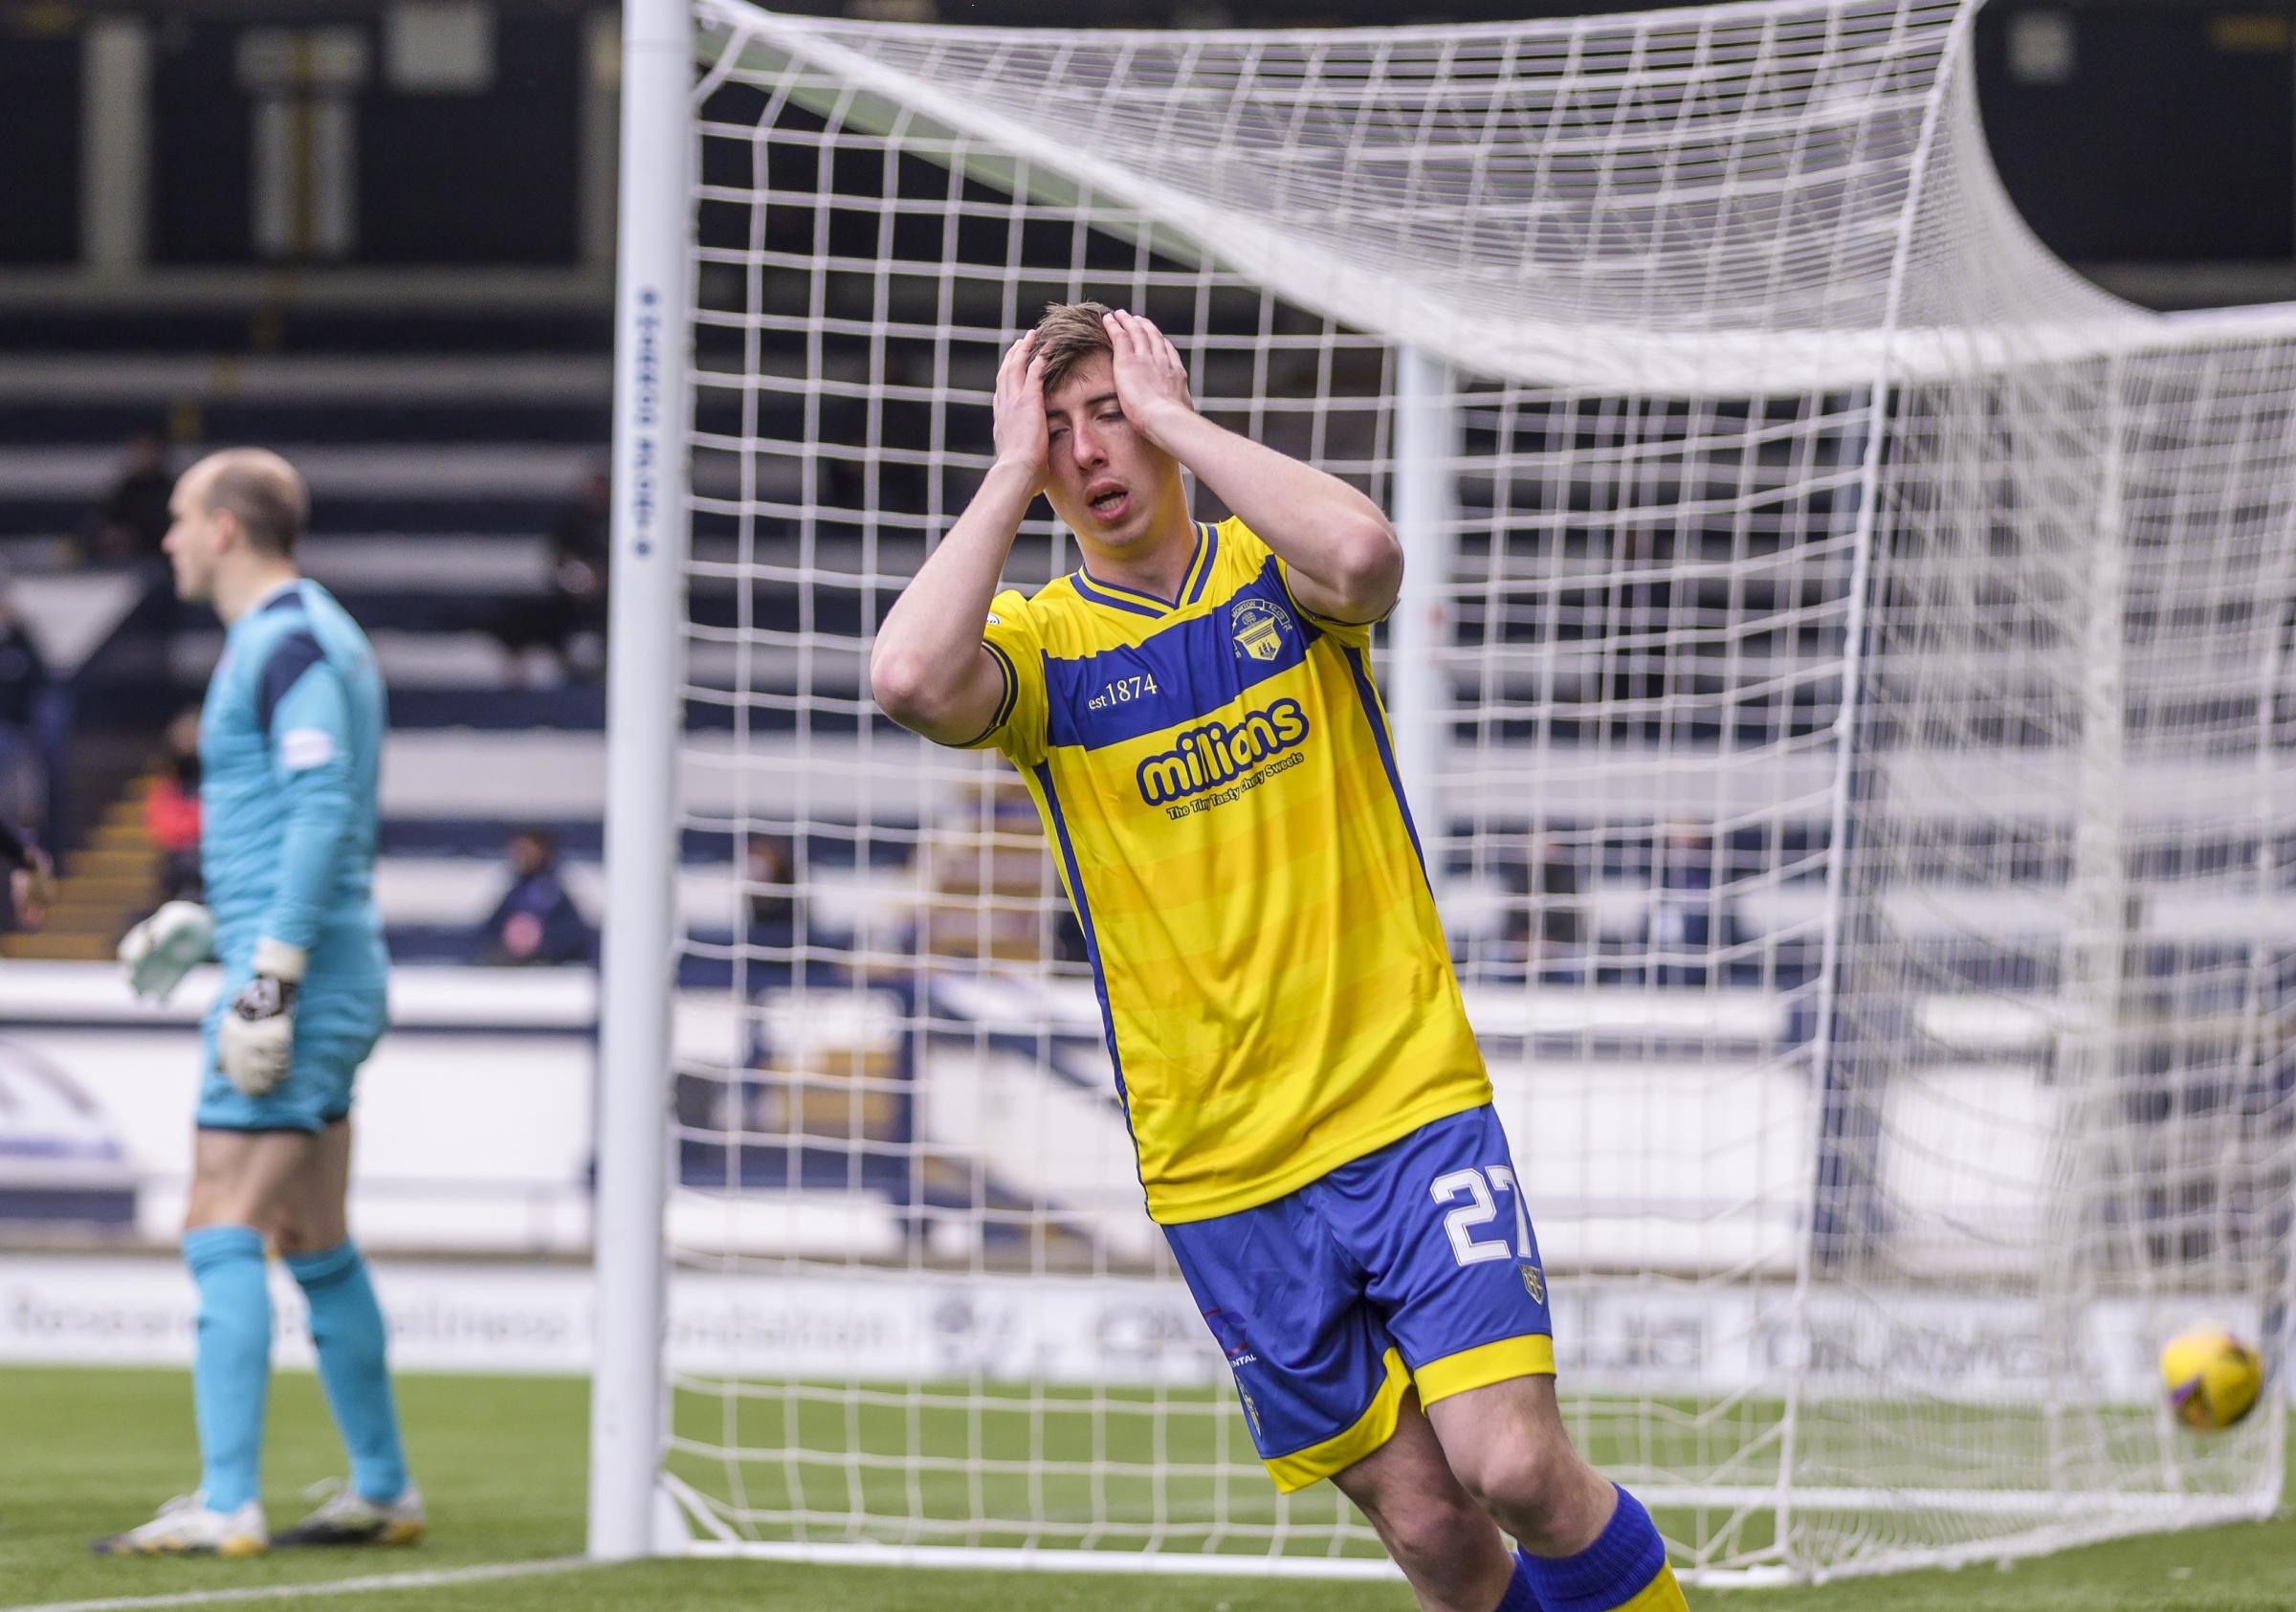 27.03.2021 Raith Rovers v Morton, SPFL Championship .............................. DARREN HYNES DEJECTION AFTER MISSING EARLY CHANCE.